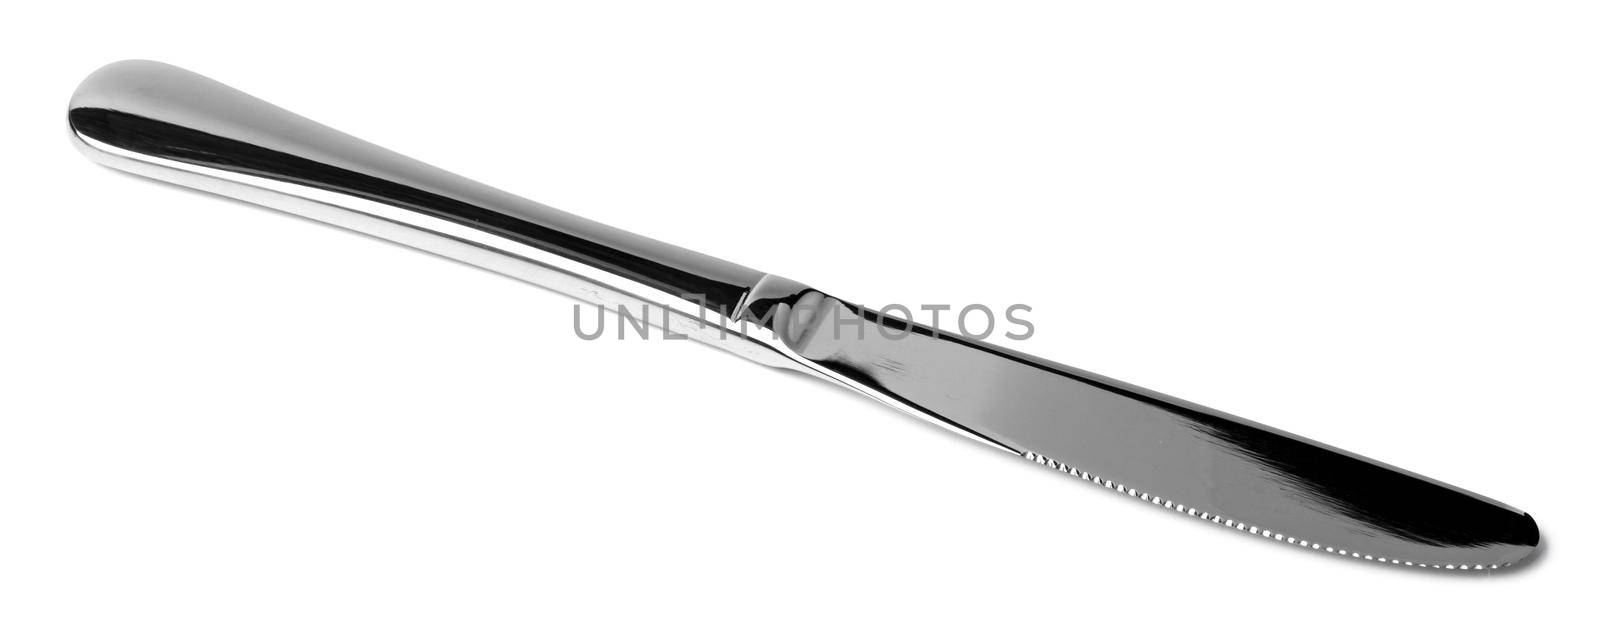 Silver dining knife isolated on white background close up